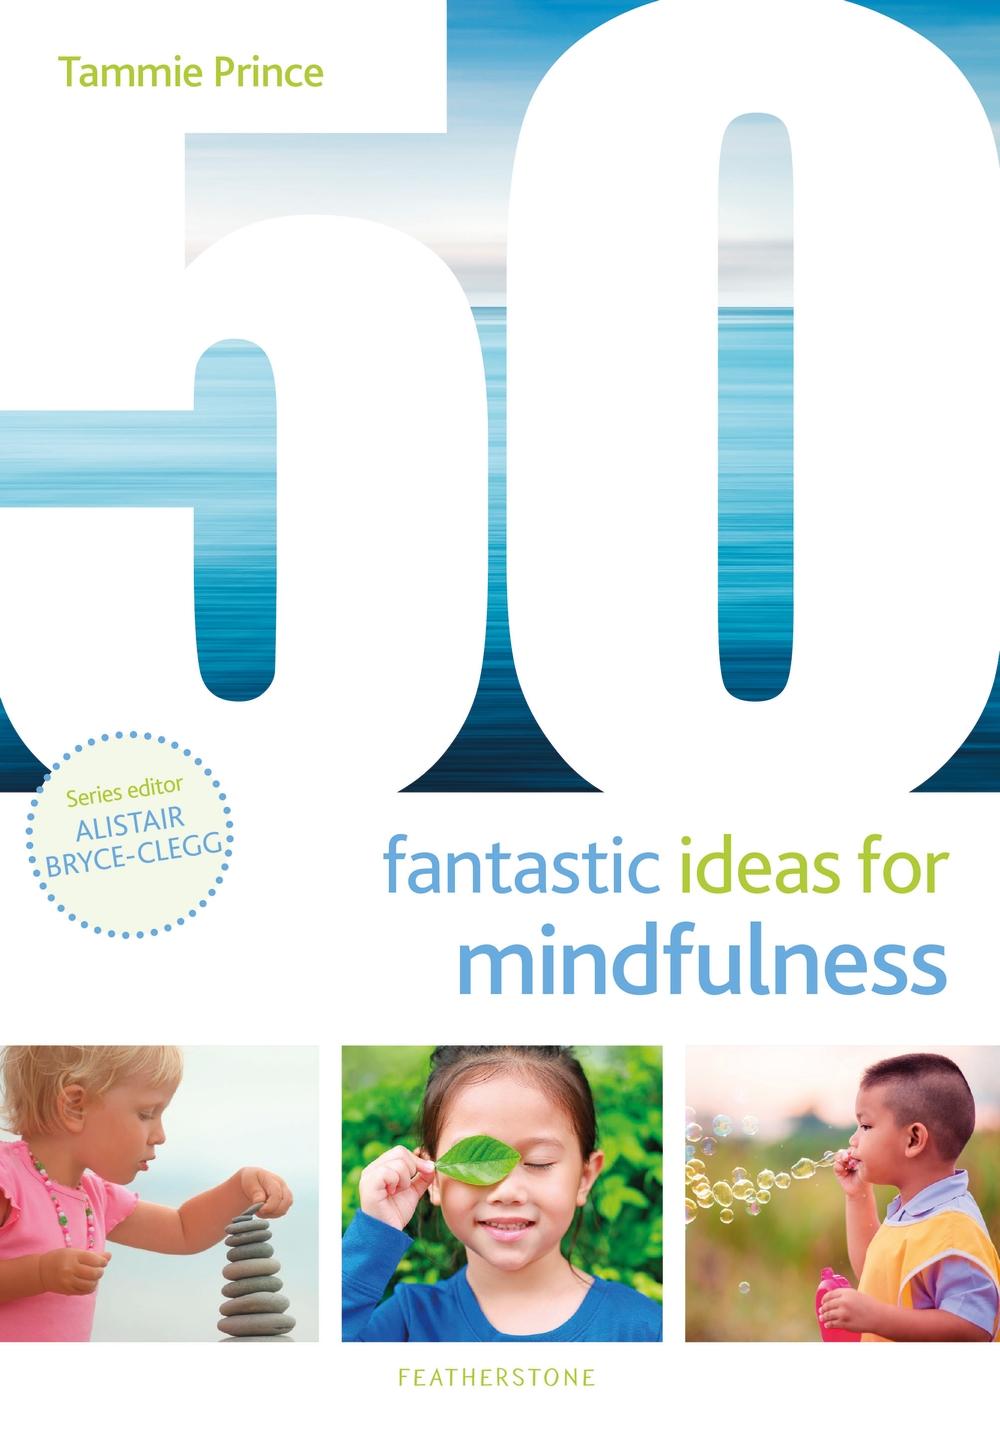 50 Fantastic Ideas for Mindfulness - Tammie Prince